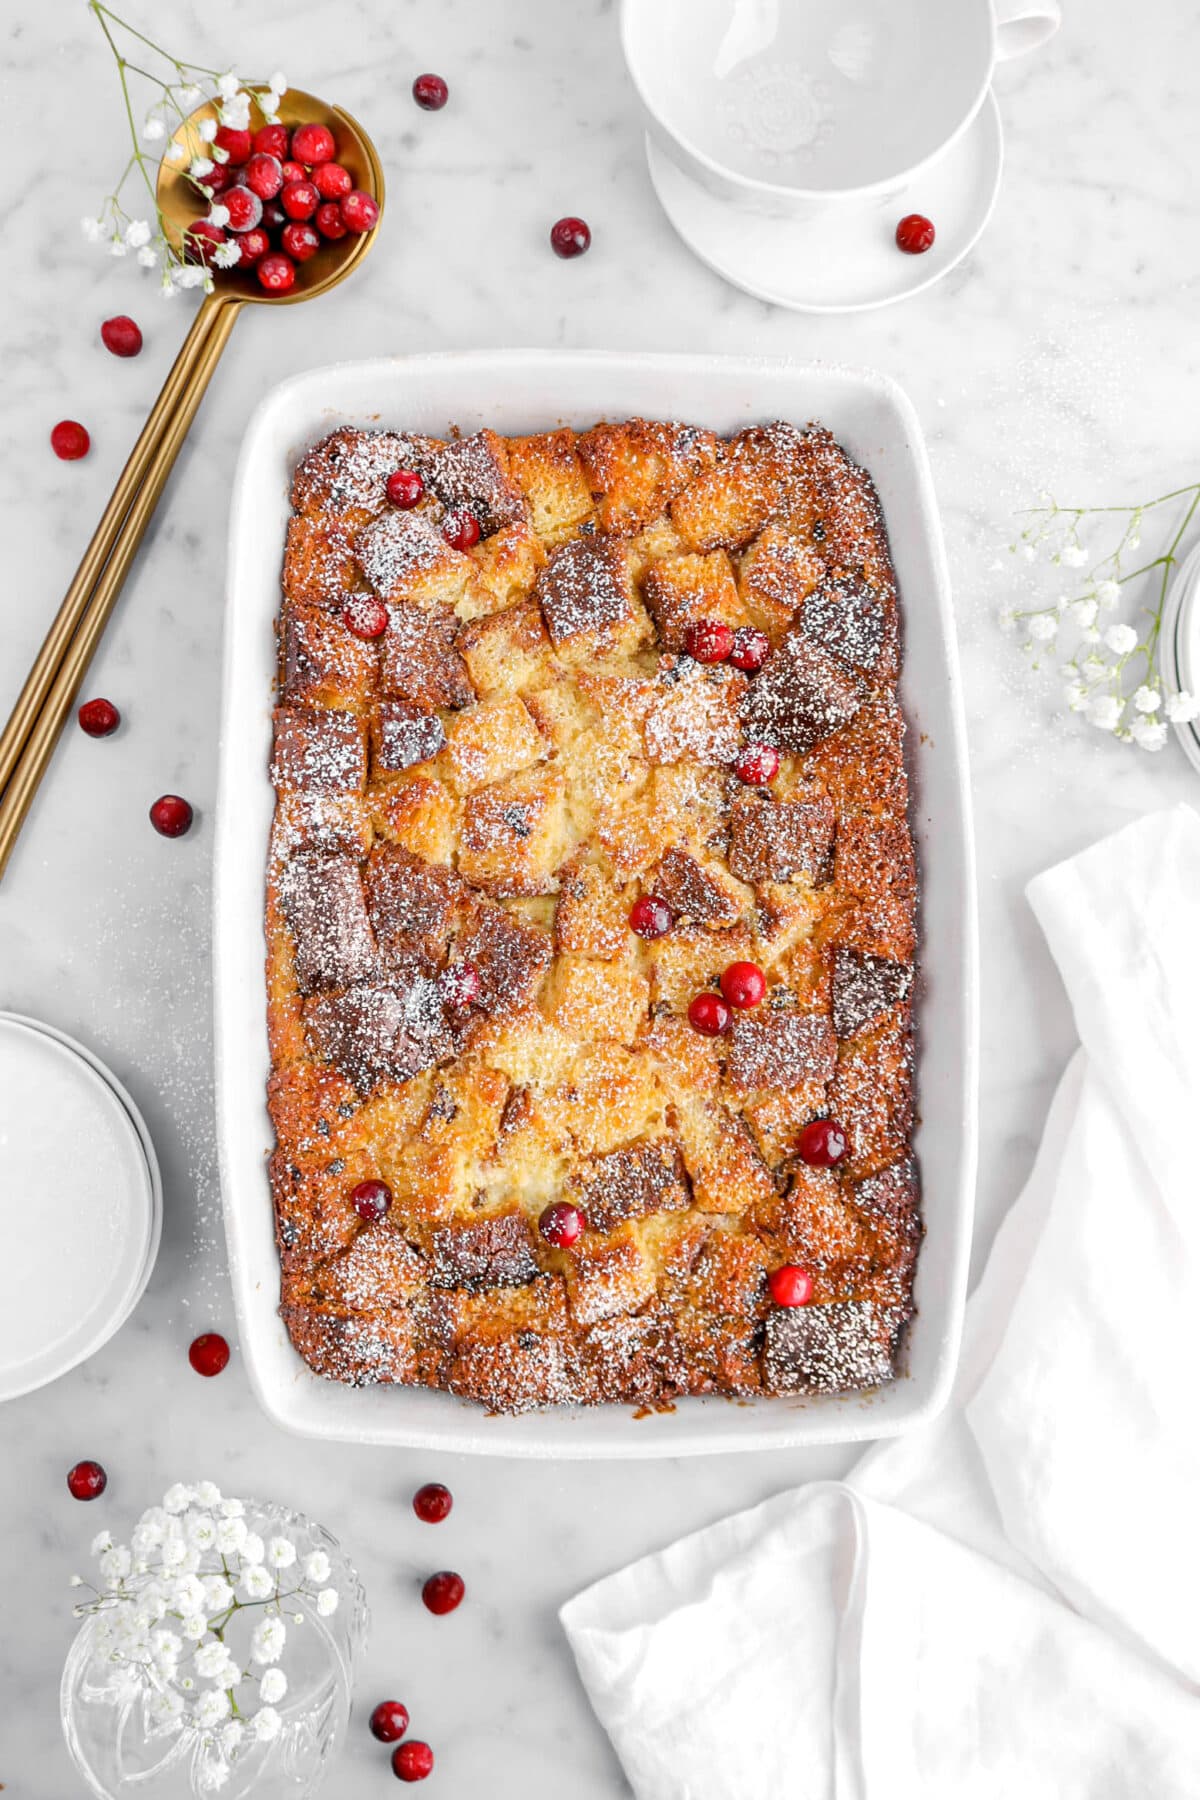 bread pudding with fresh cranberries and powdered sugar on top, with white napkin beside, flowers, and gold serving spoon full of cranberries on marble surface.